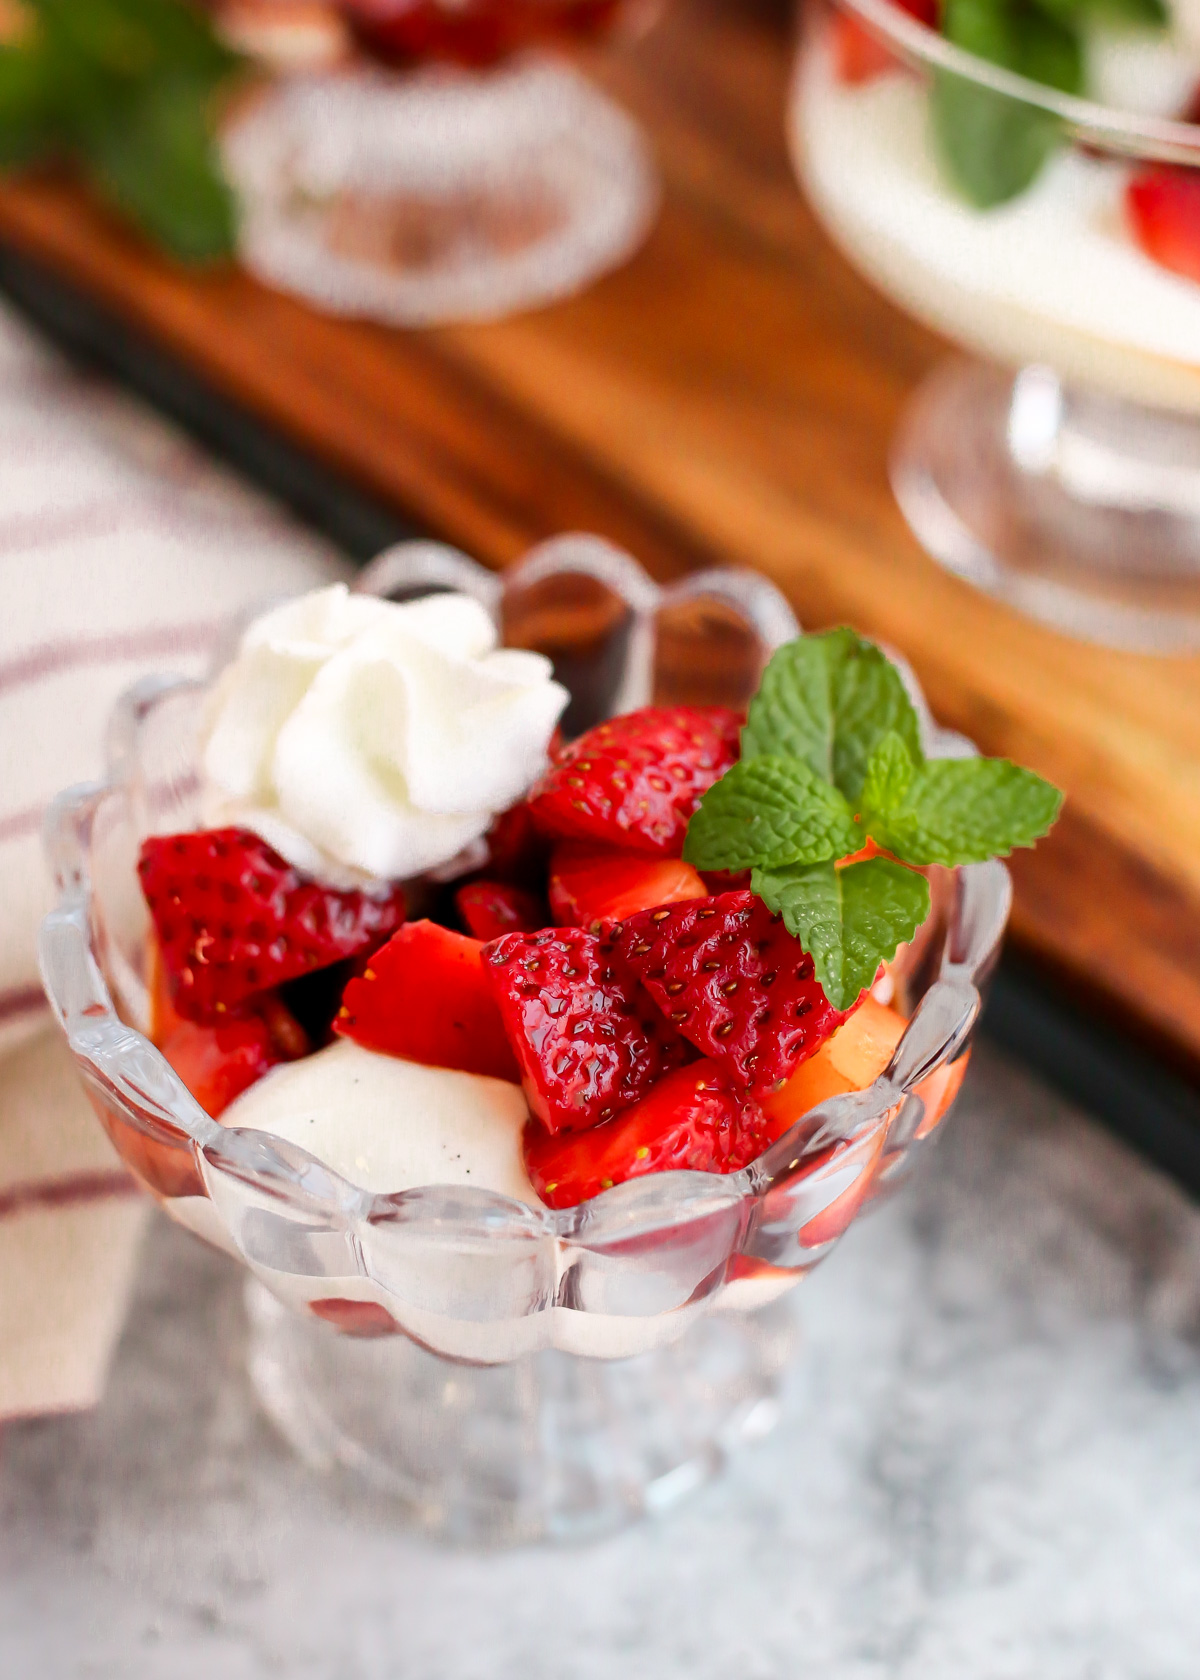 Angled view of a glass serving dish filled with balsamic macerated strawberries and cream, garnished with a sprig of fresh mint leaves and some fresh whipped cream